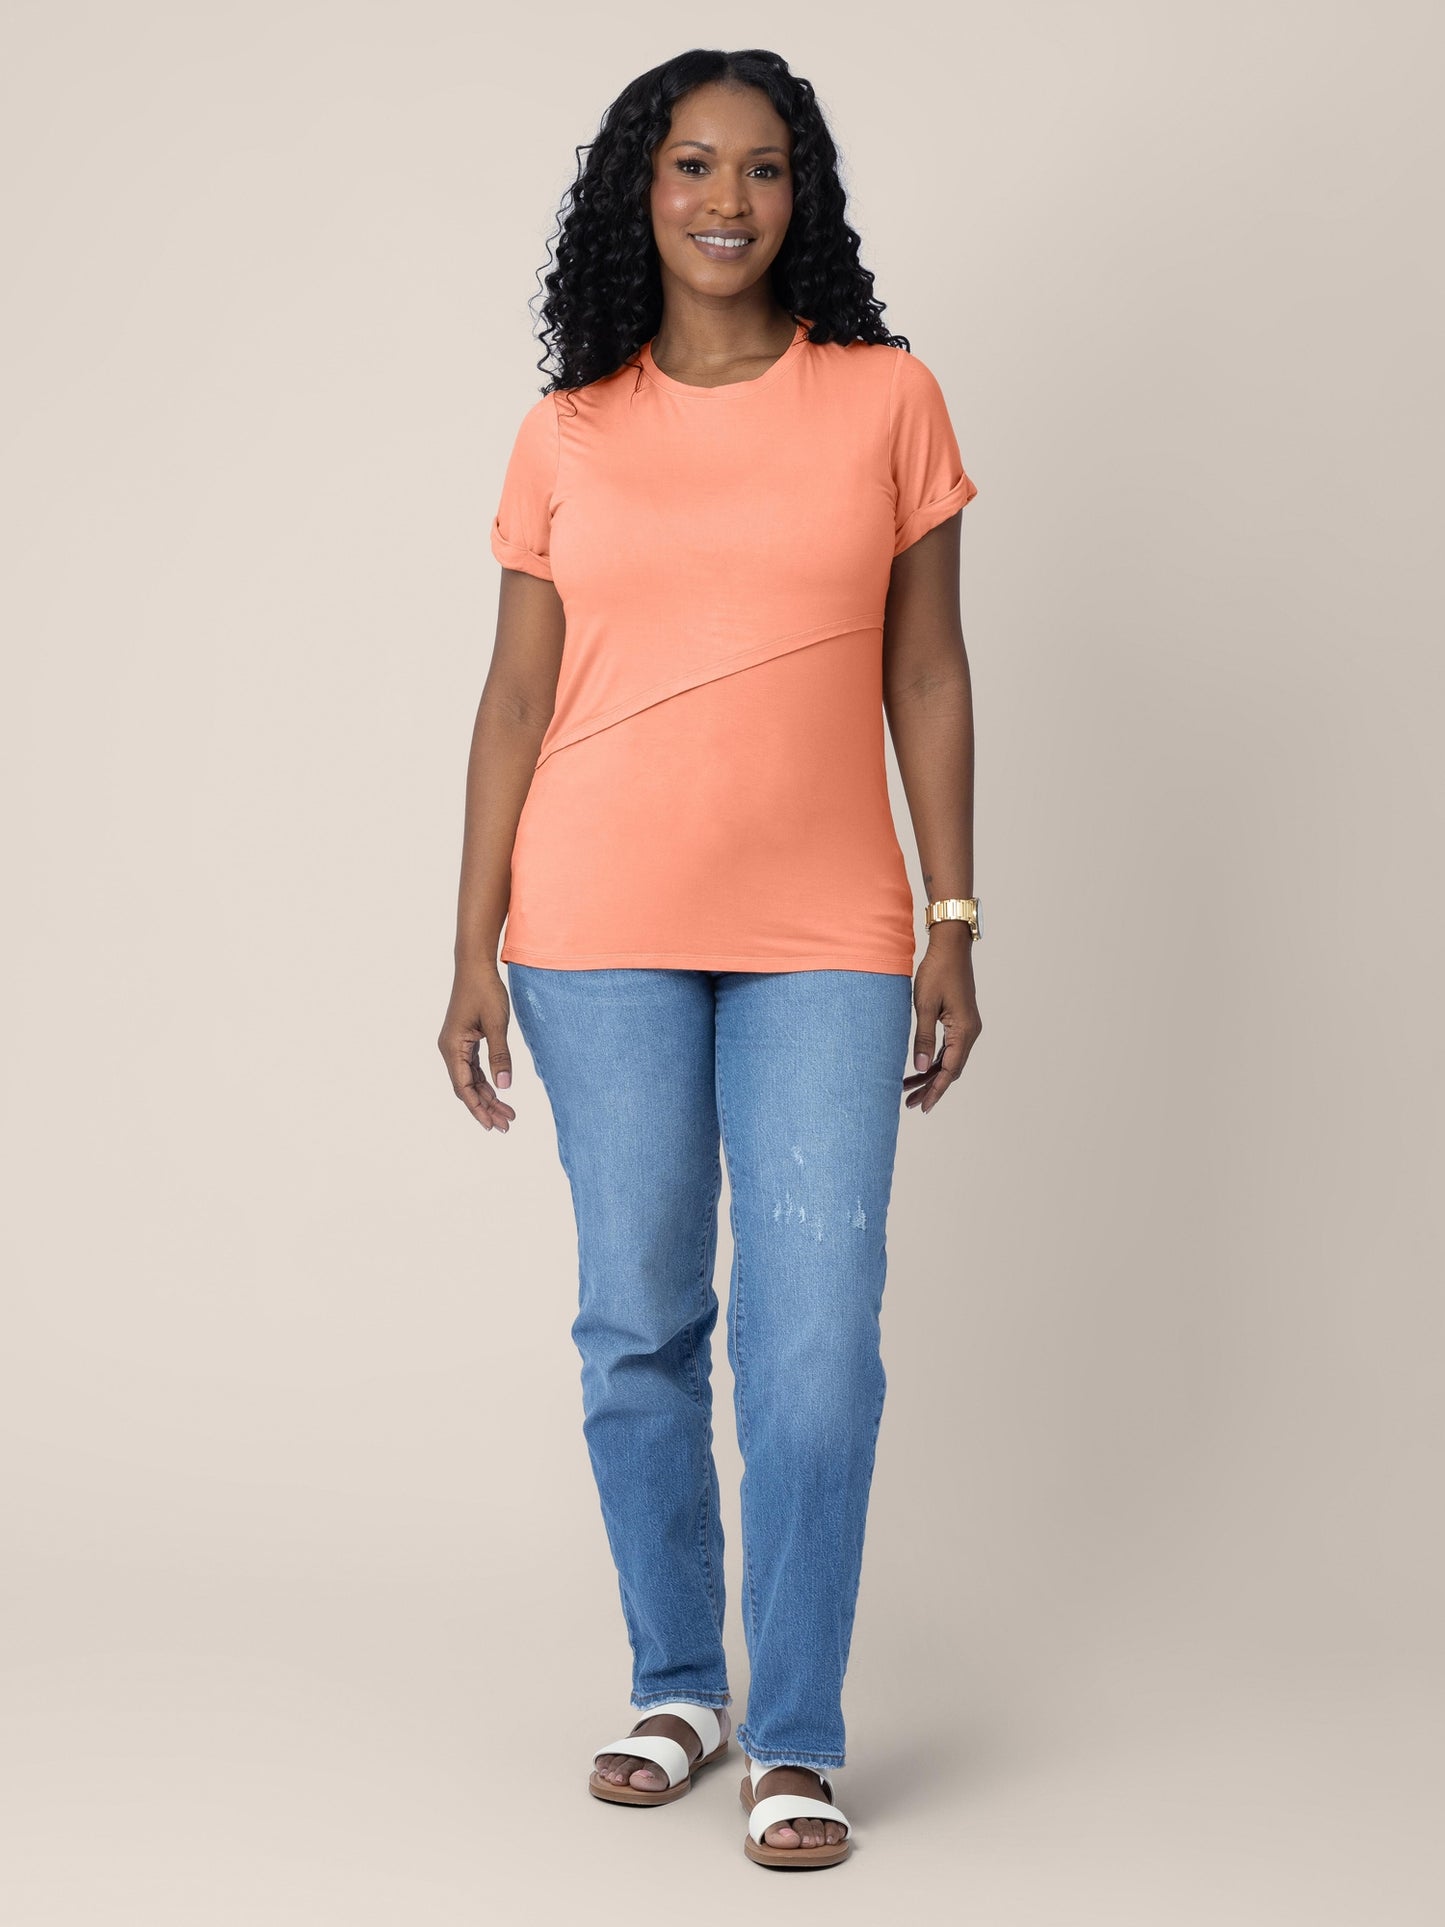 Full body of a Model wearing the Everyday Asymmetrical Nursing T-shirt in Vintage Coral.